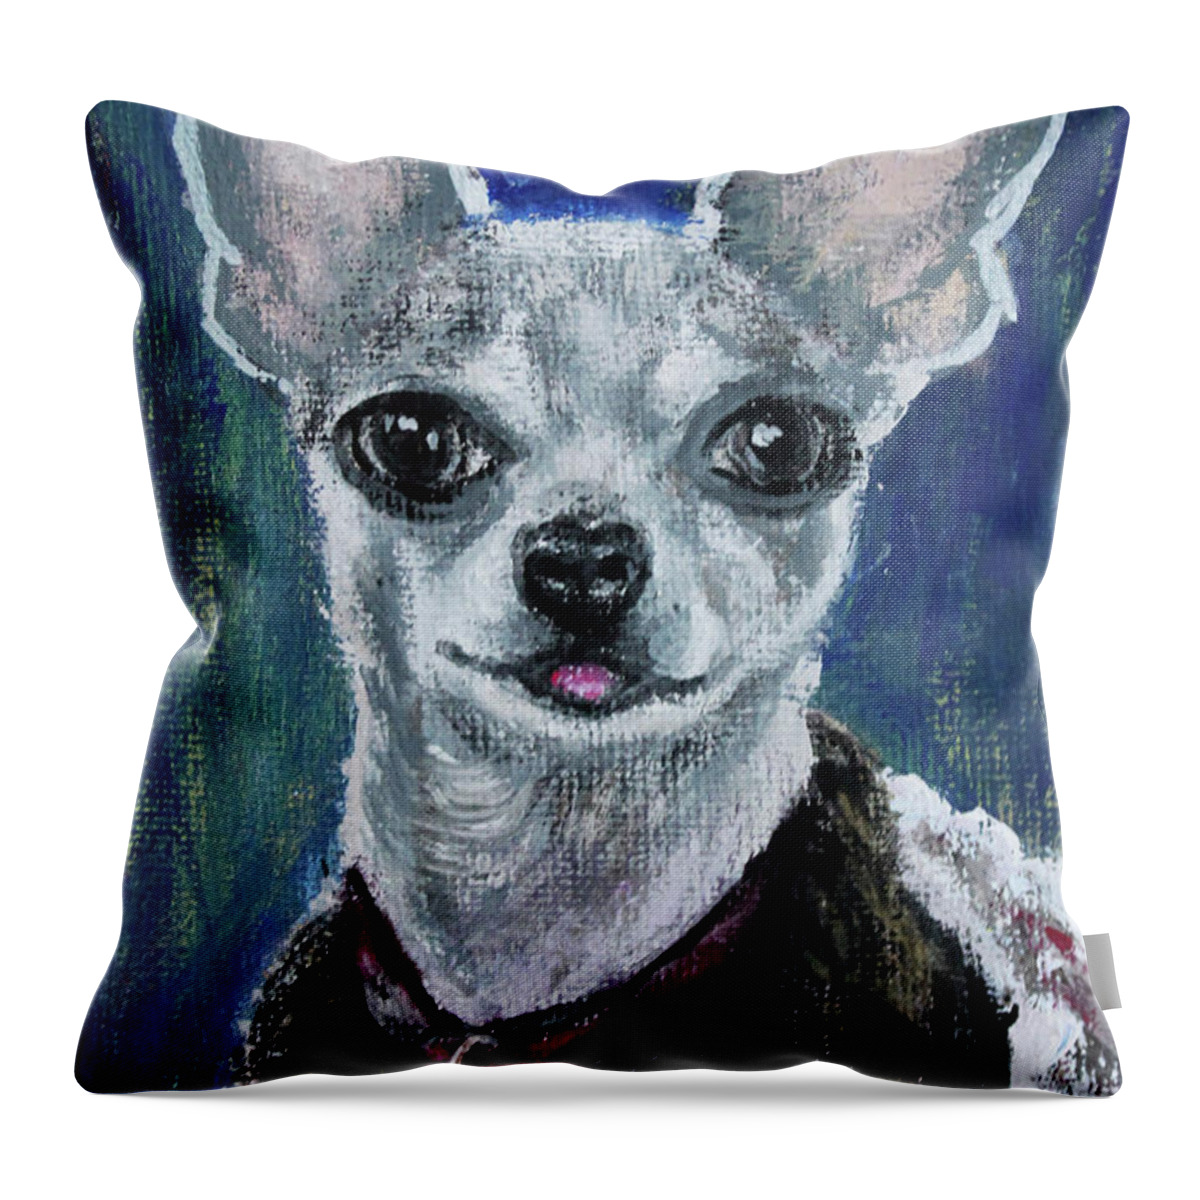 Animal Throw Pillow featuring the painting Spunky Chihuahua by Lyric Lucas